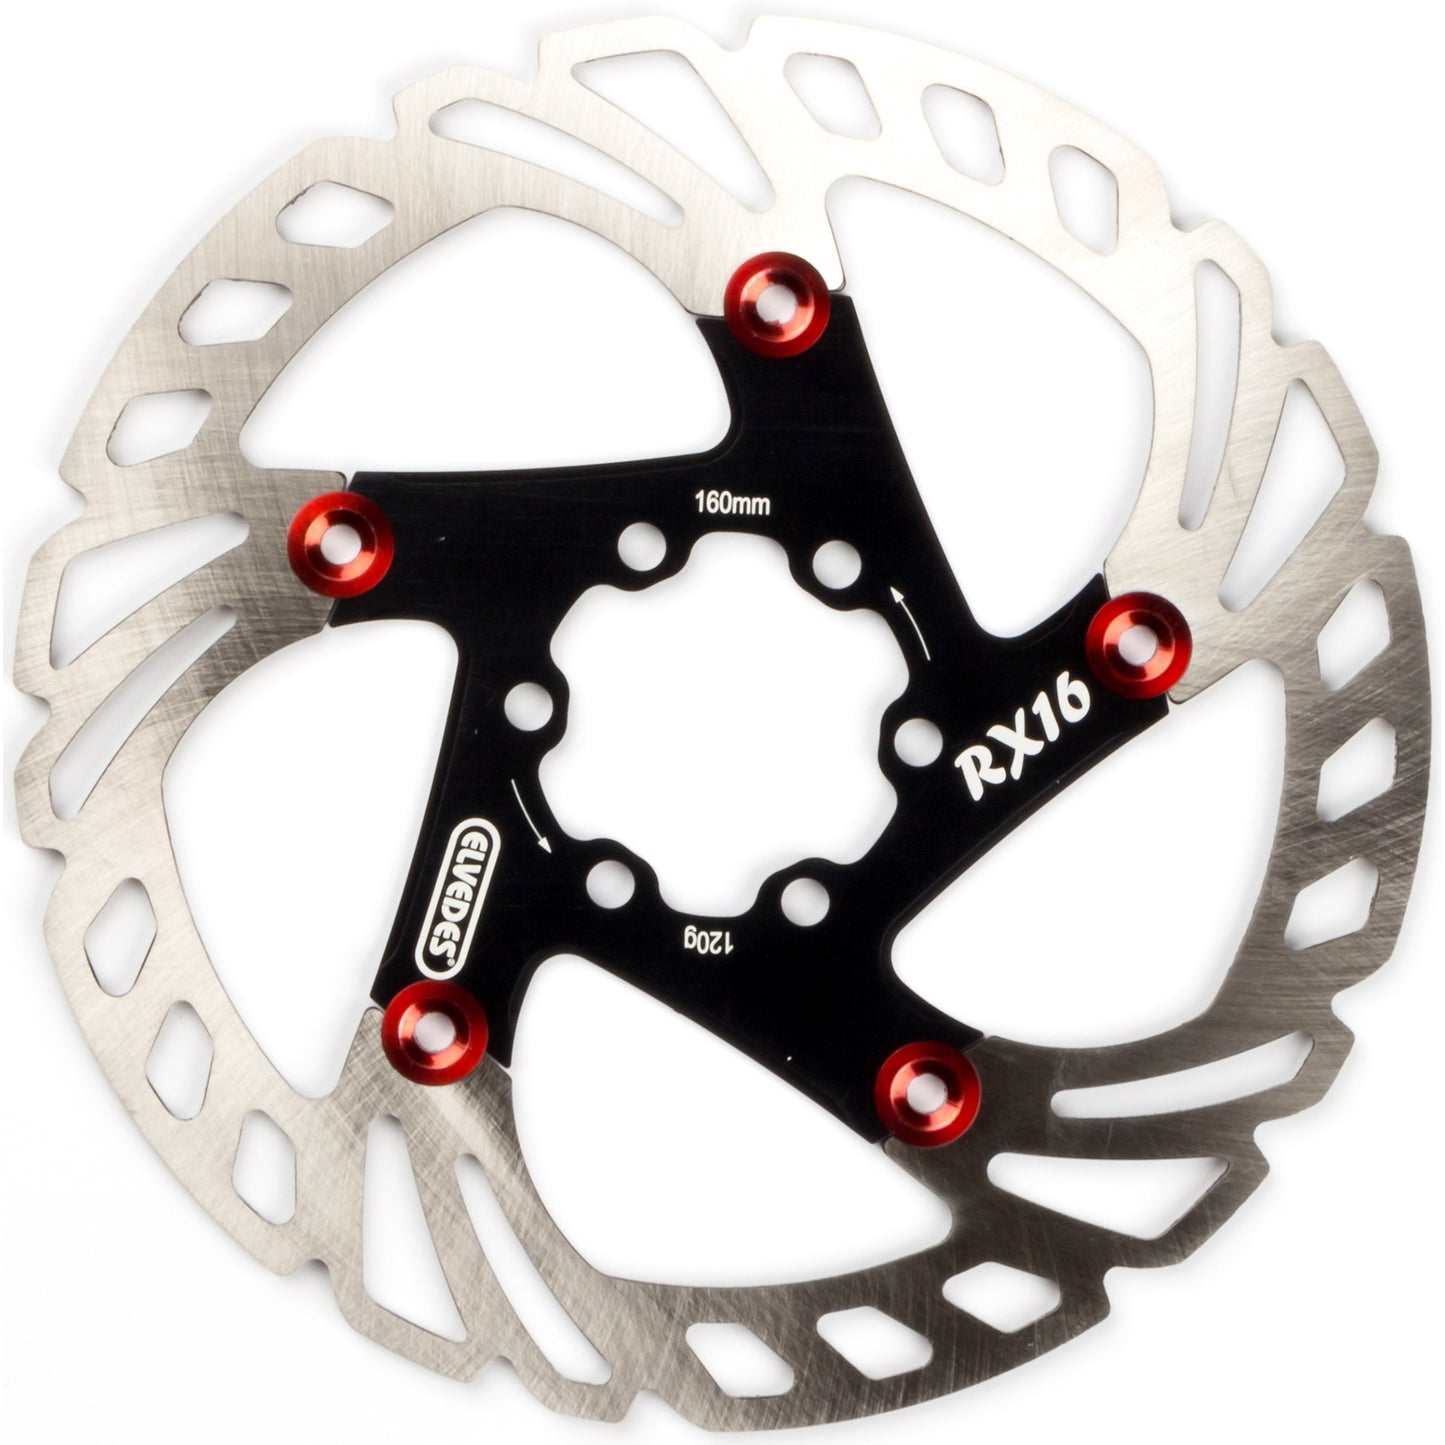 Elvedes Rx16 Floating Rotor 160mm 120G 6 fori+bout2015206